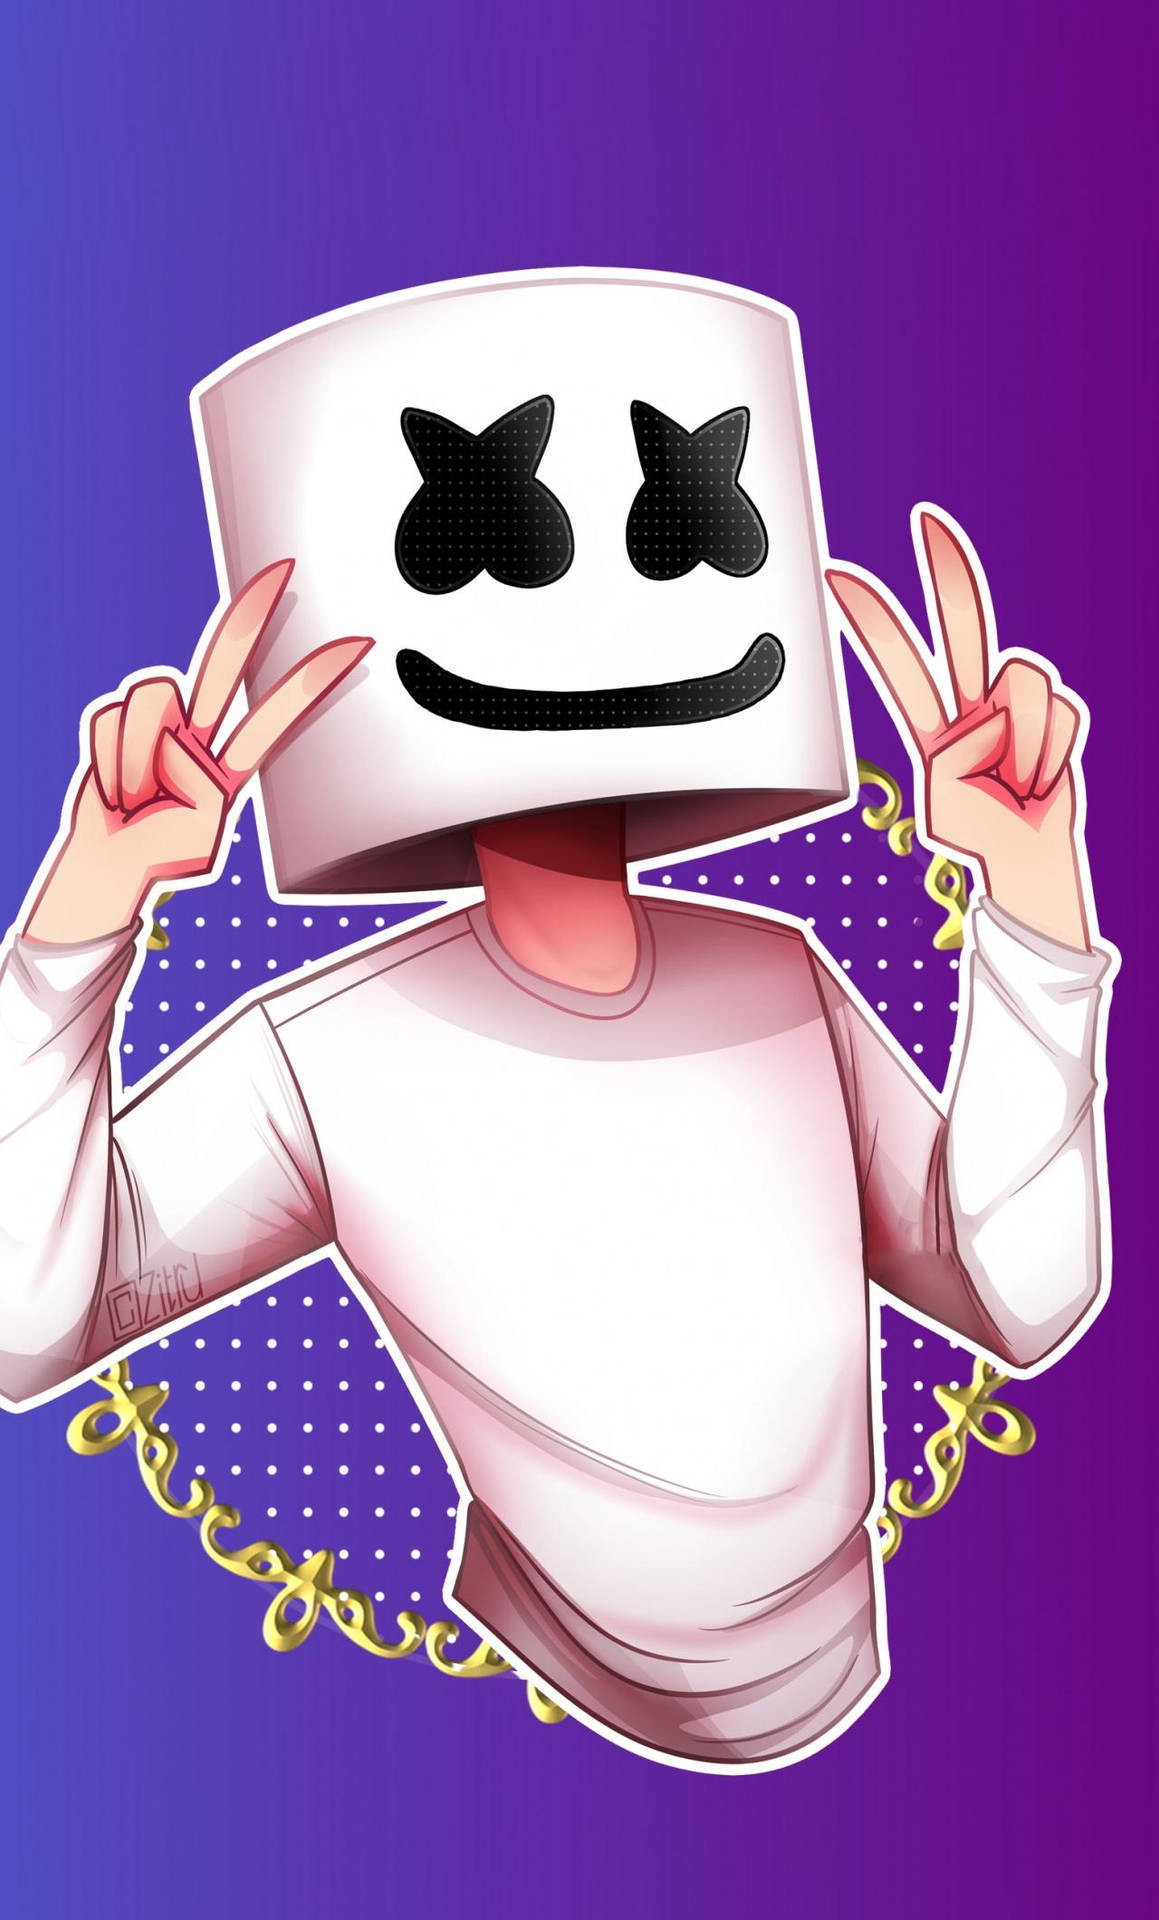 Exciting Marshmello Themed Iphone Wallpaper Wallpaper